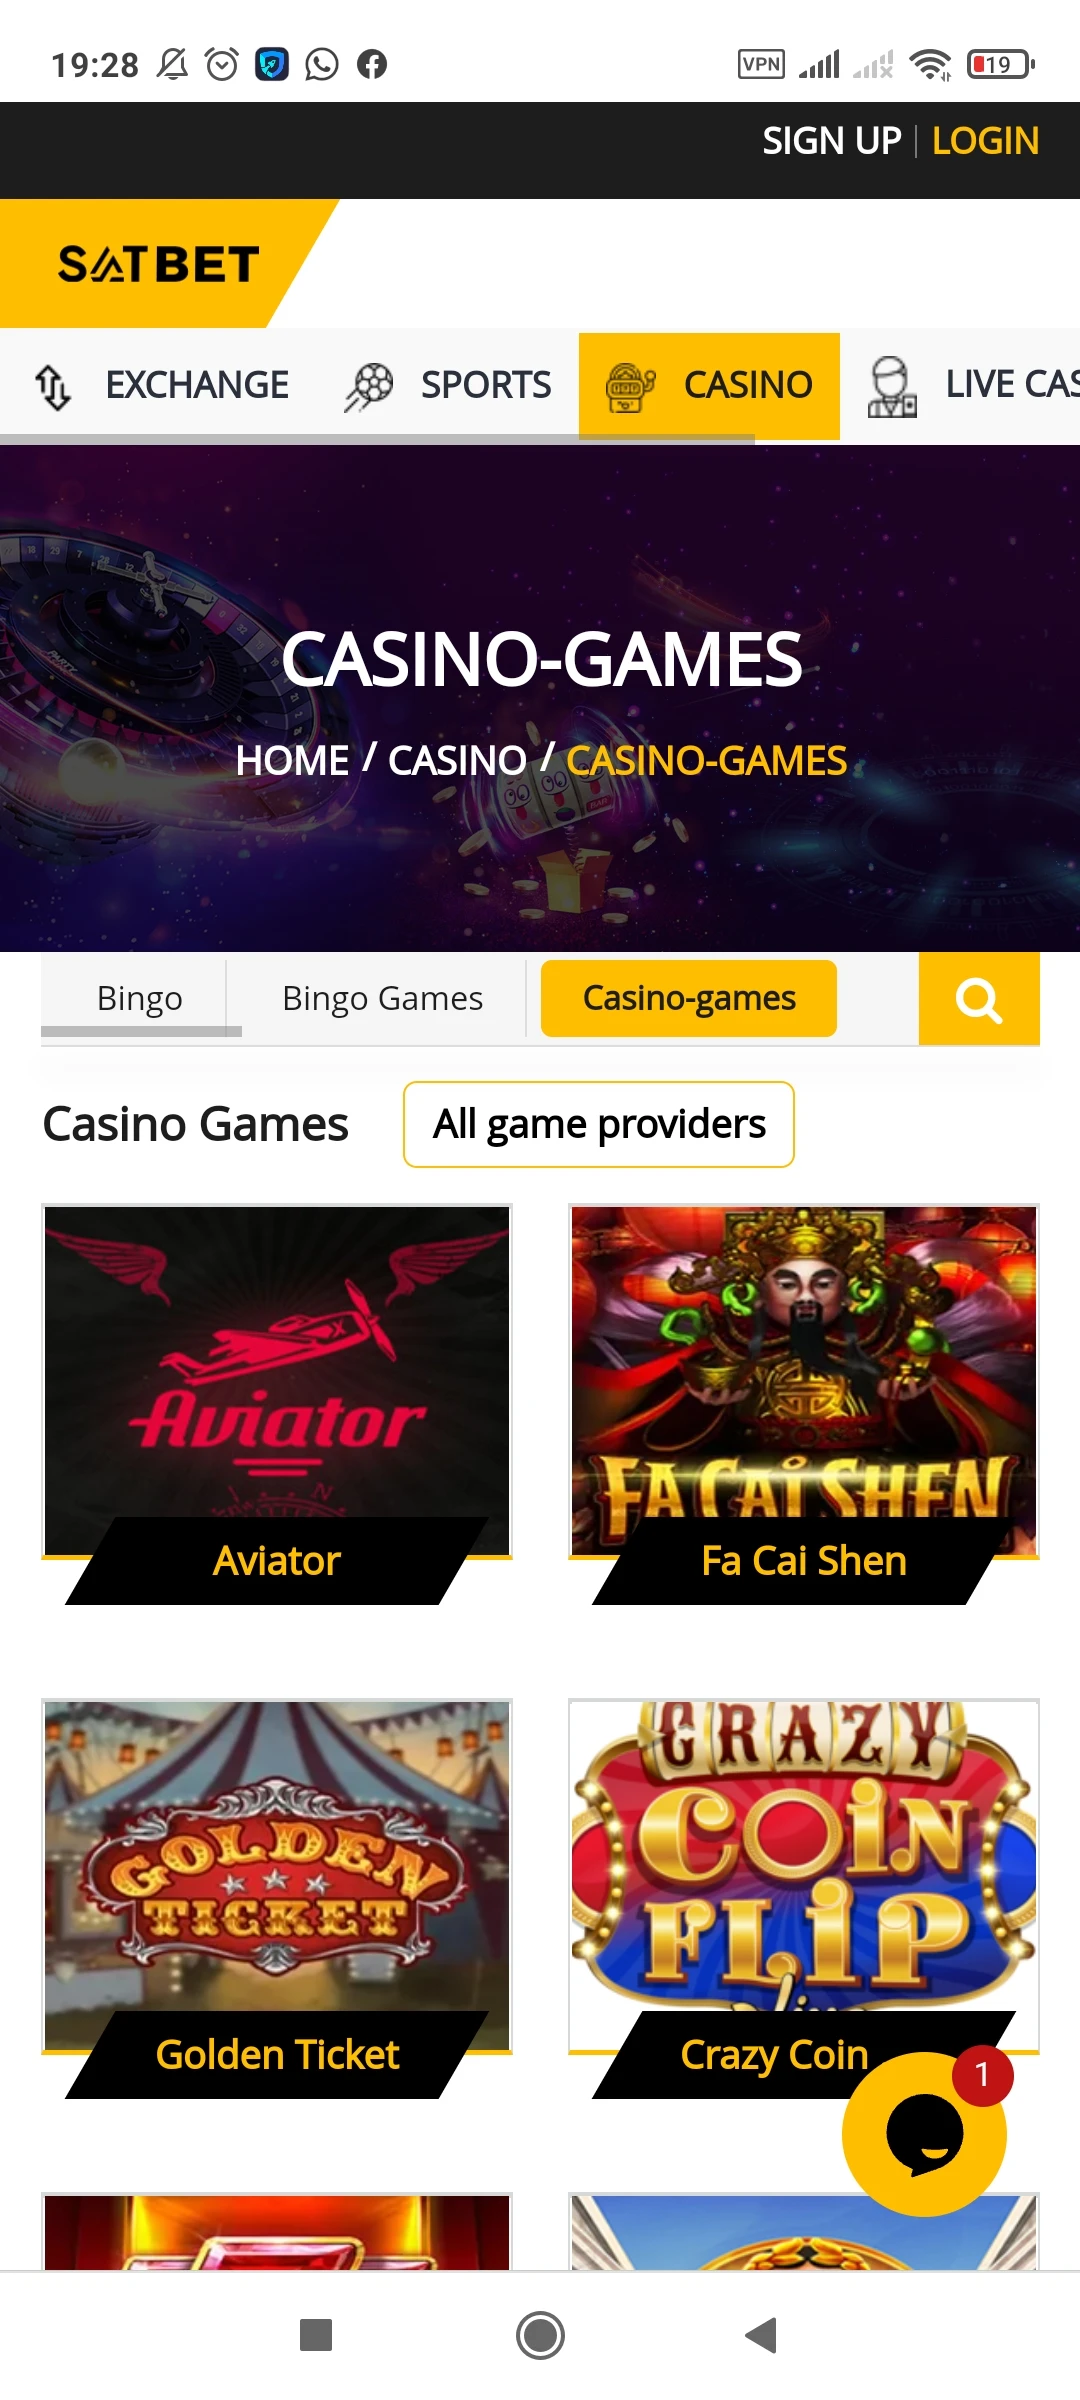 Visit the games page in the Satbet app.